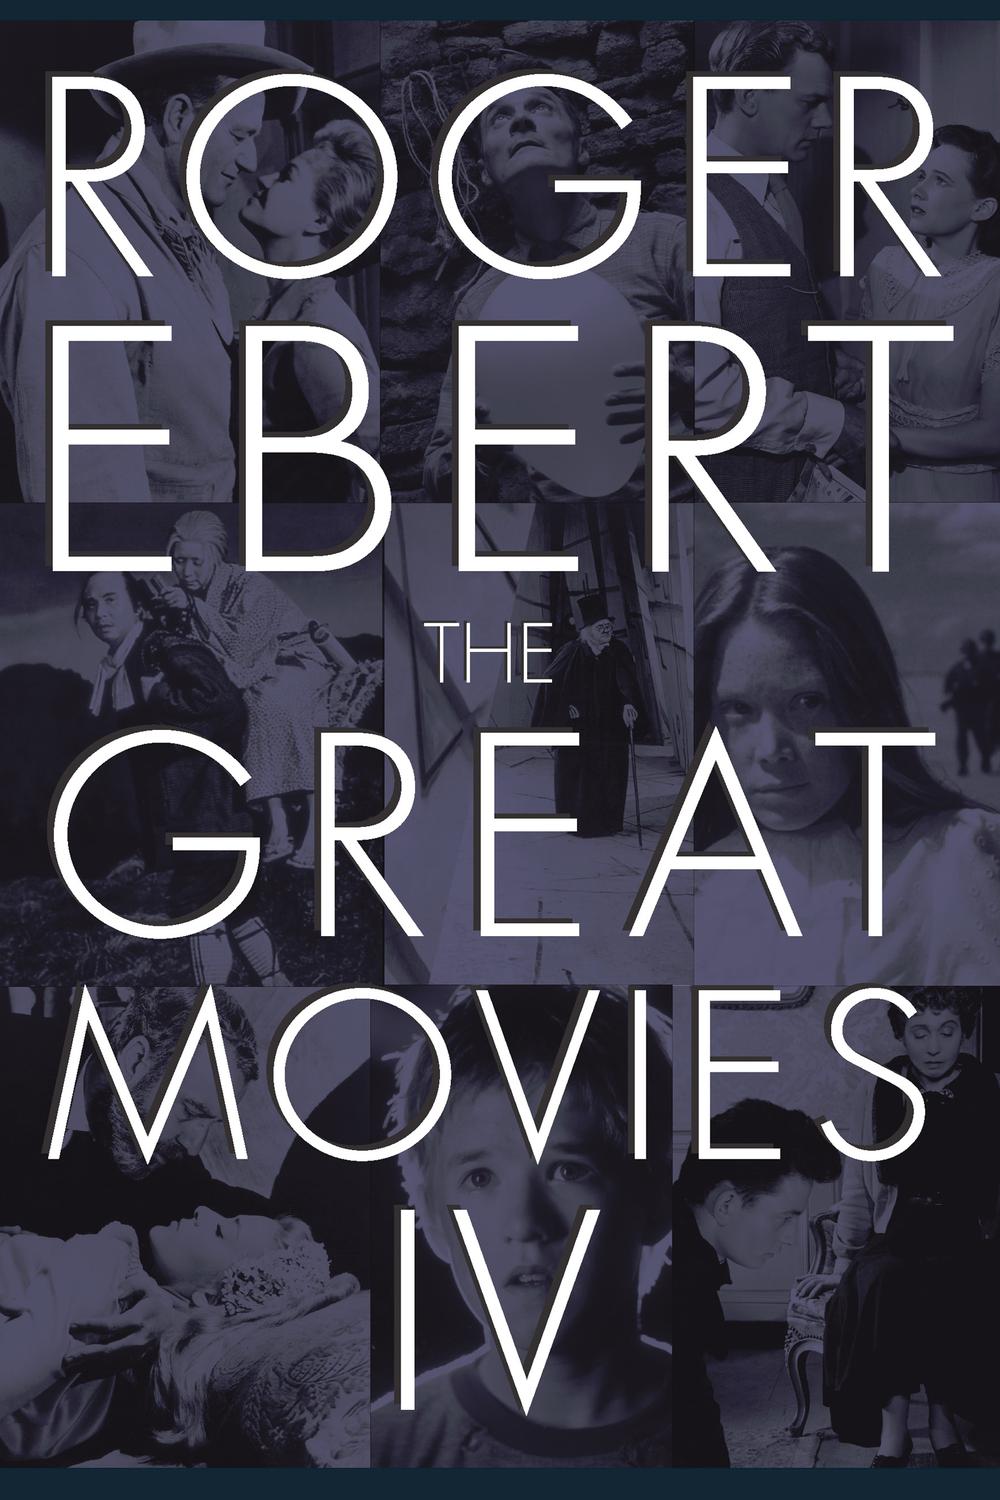 The Great Movies IV - Roger Ebert